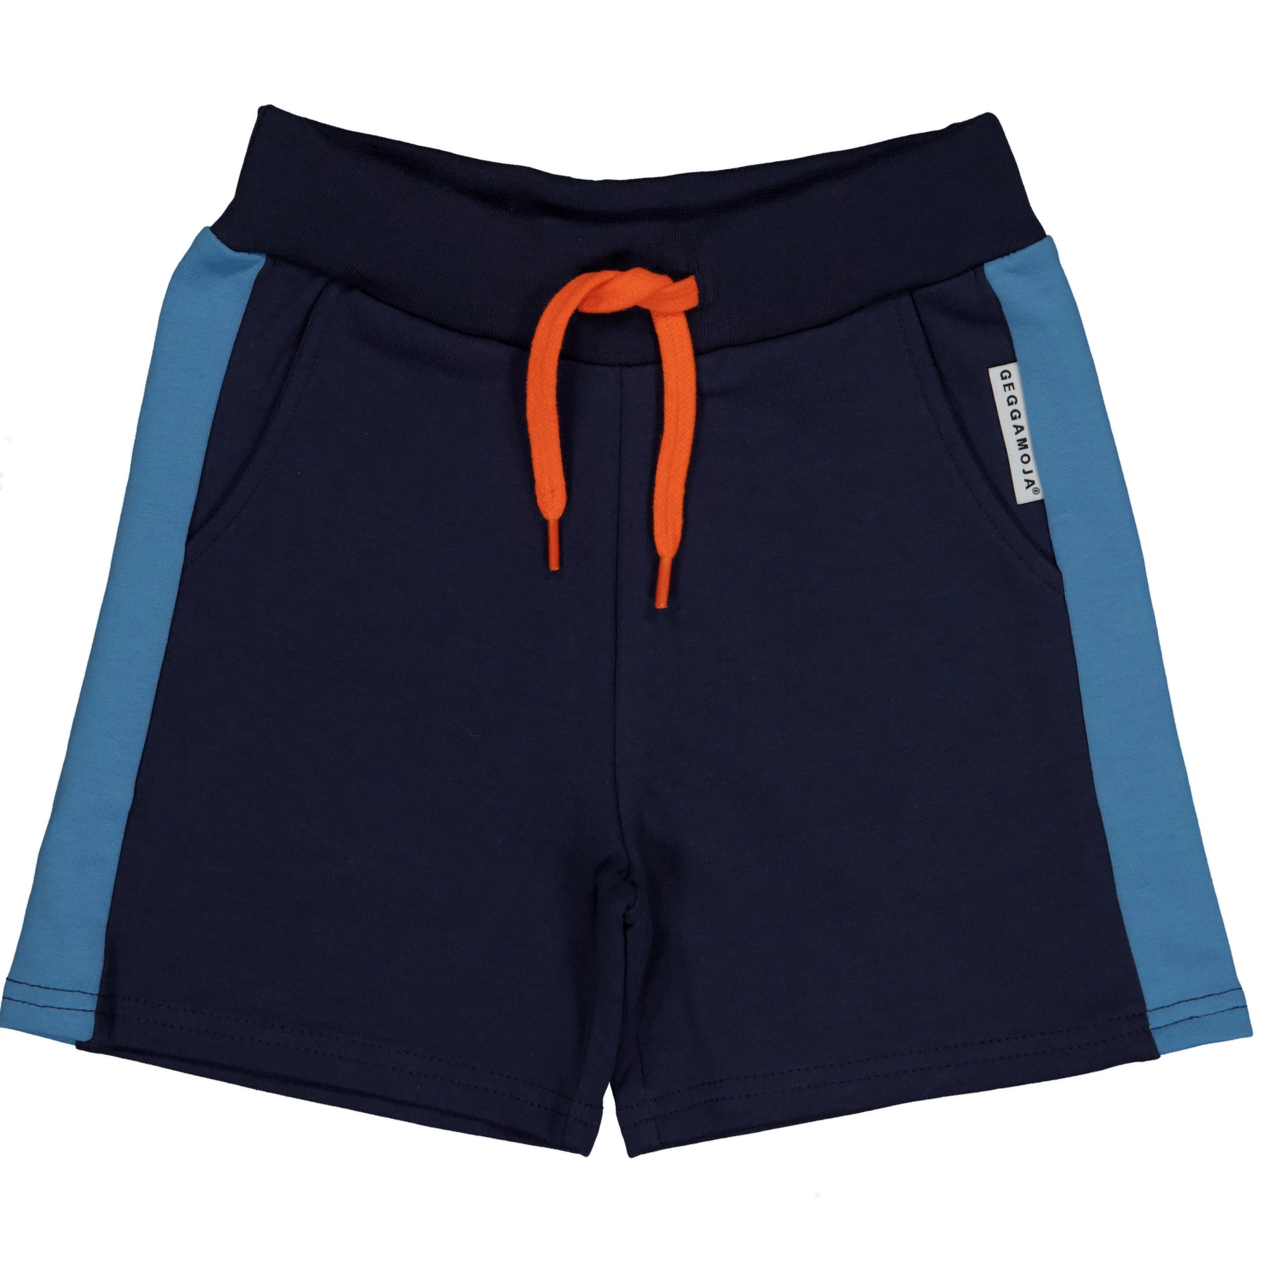 College shorts Navy 134/140